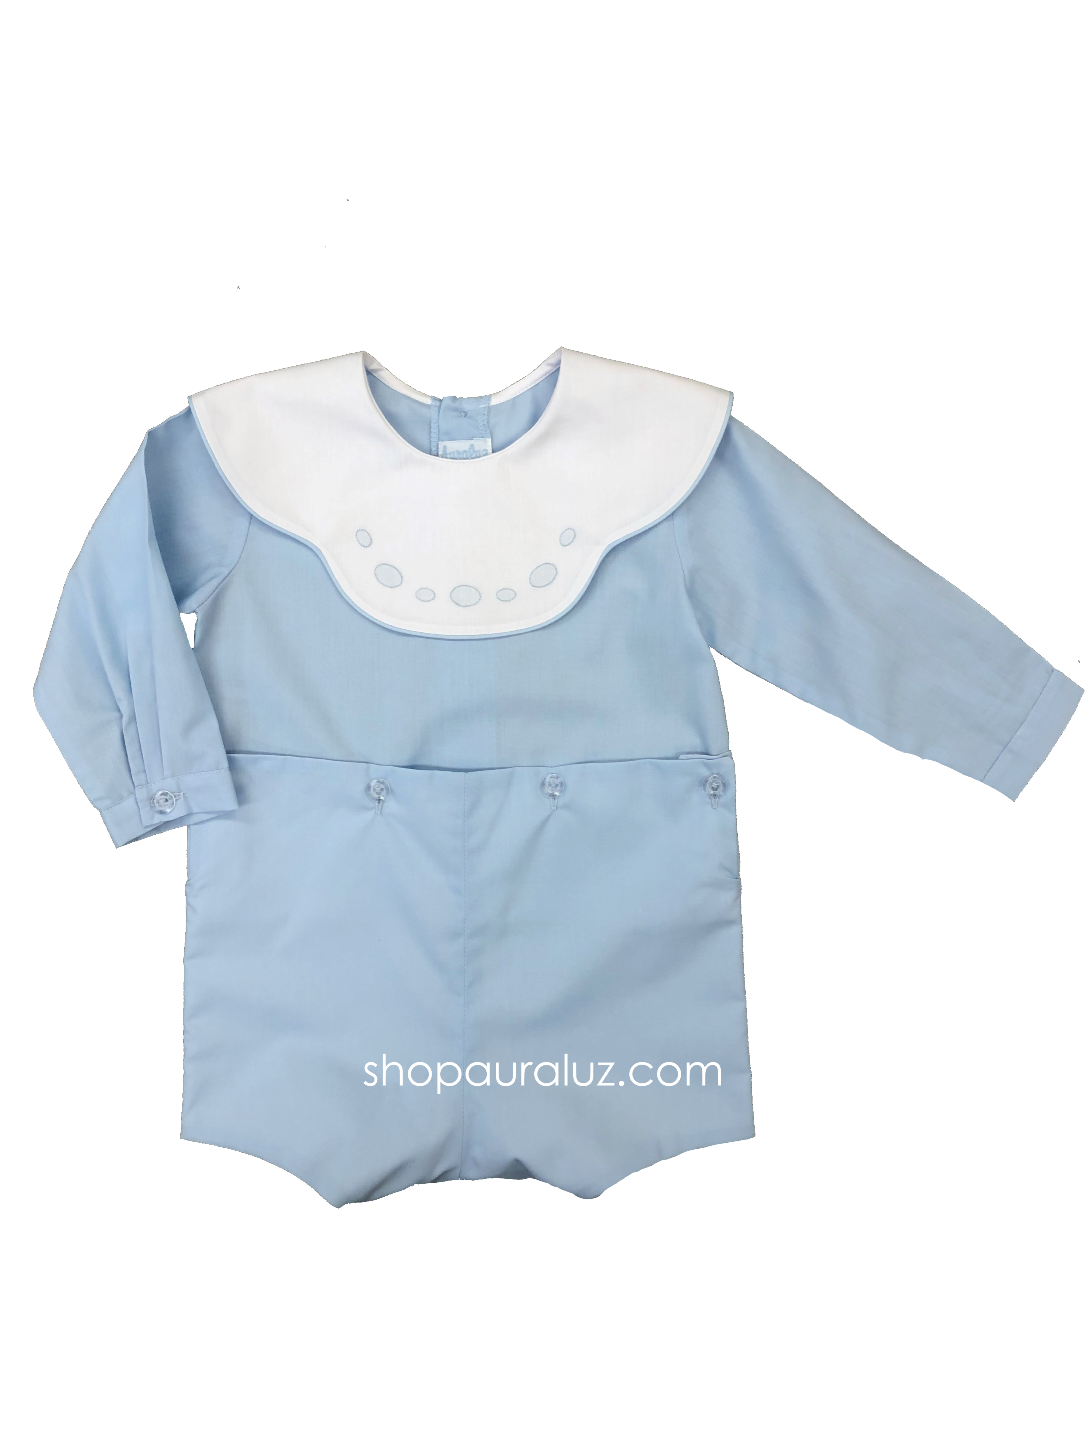 Auraluz Button-On, l/s...Blue w/binding, white scalloped collar and embroidered ovals